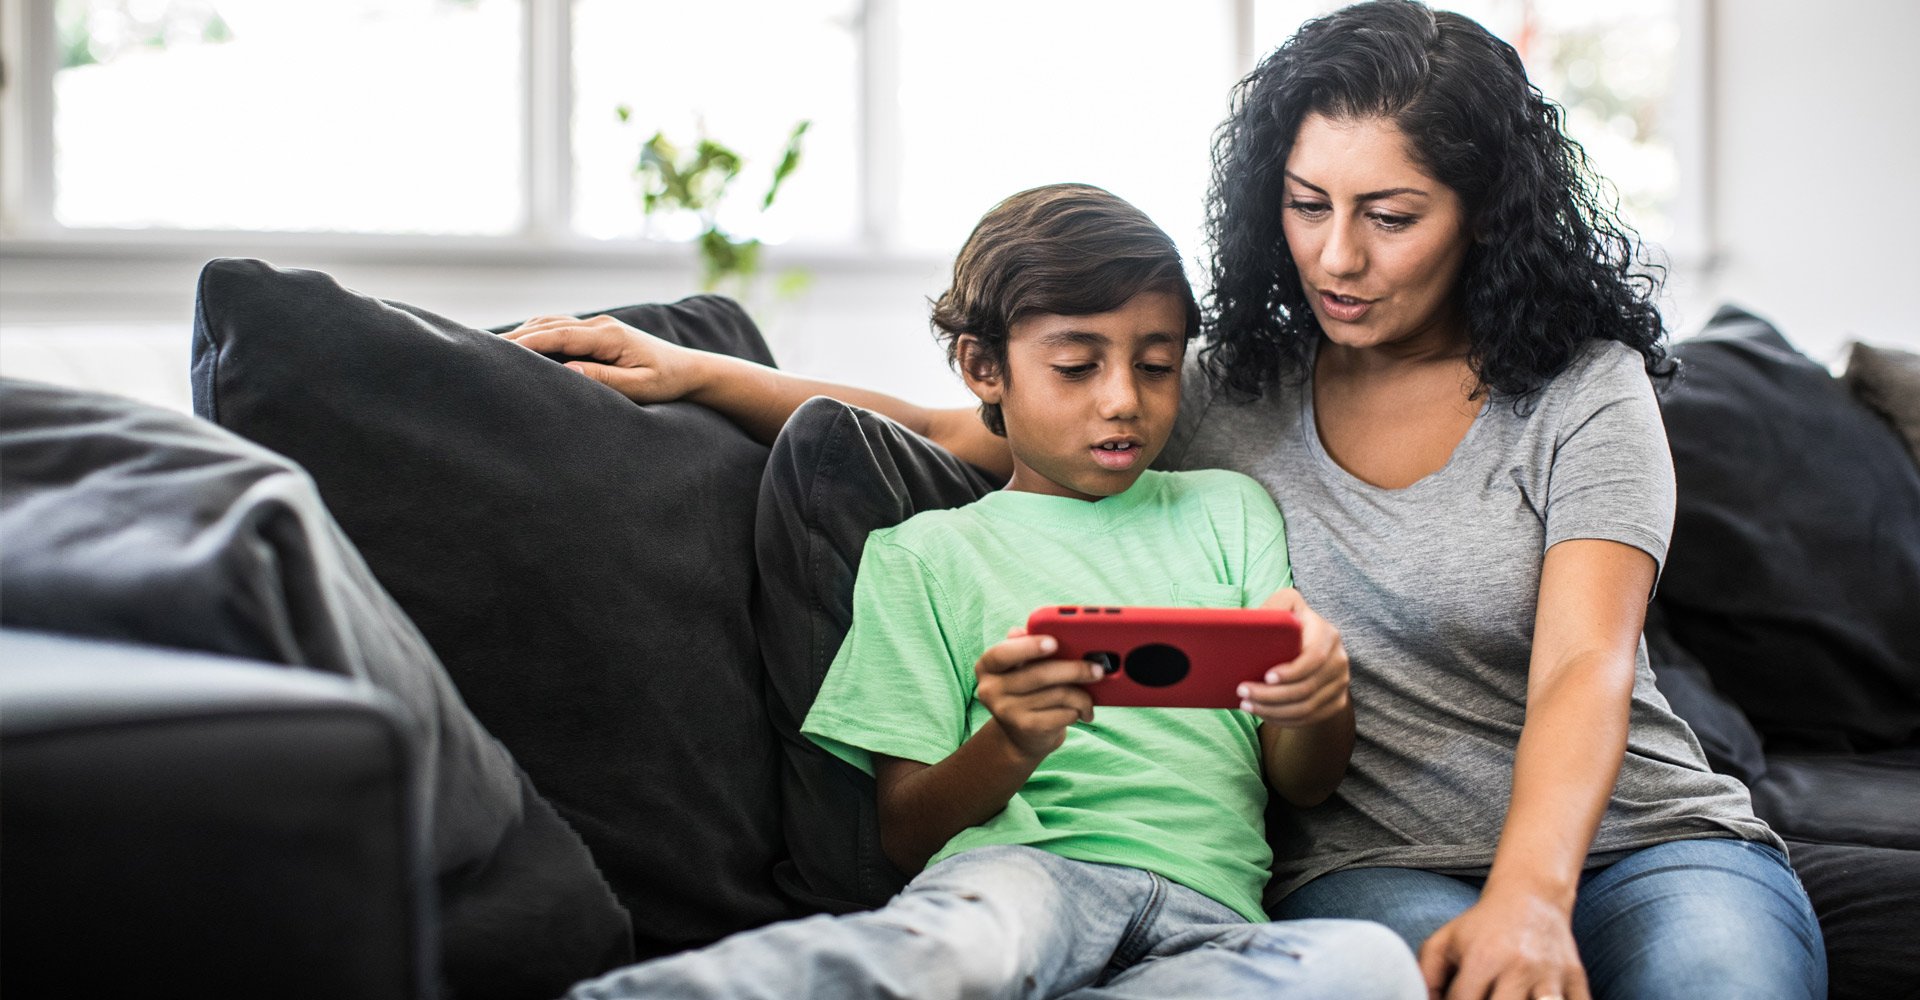 How to keep your kids safe from predators lurking on online games